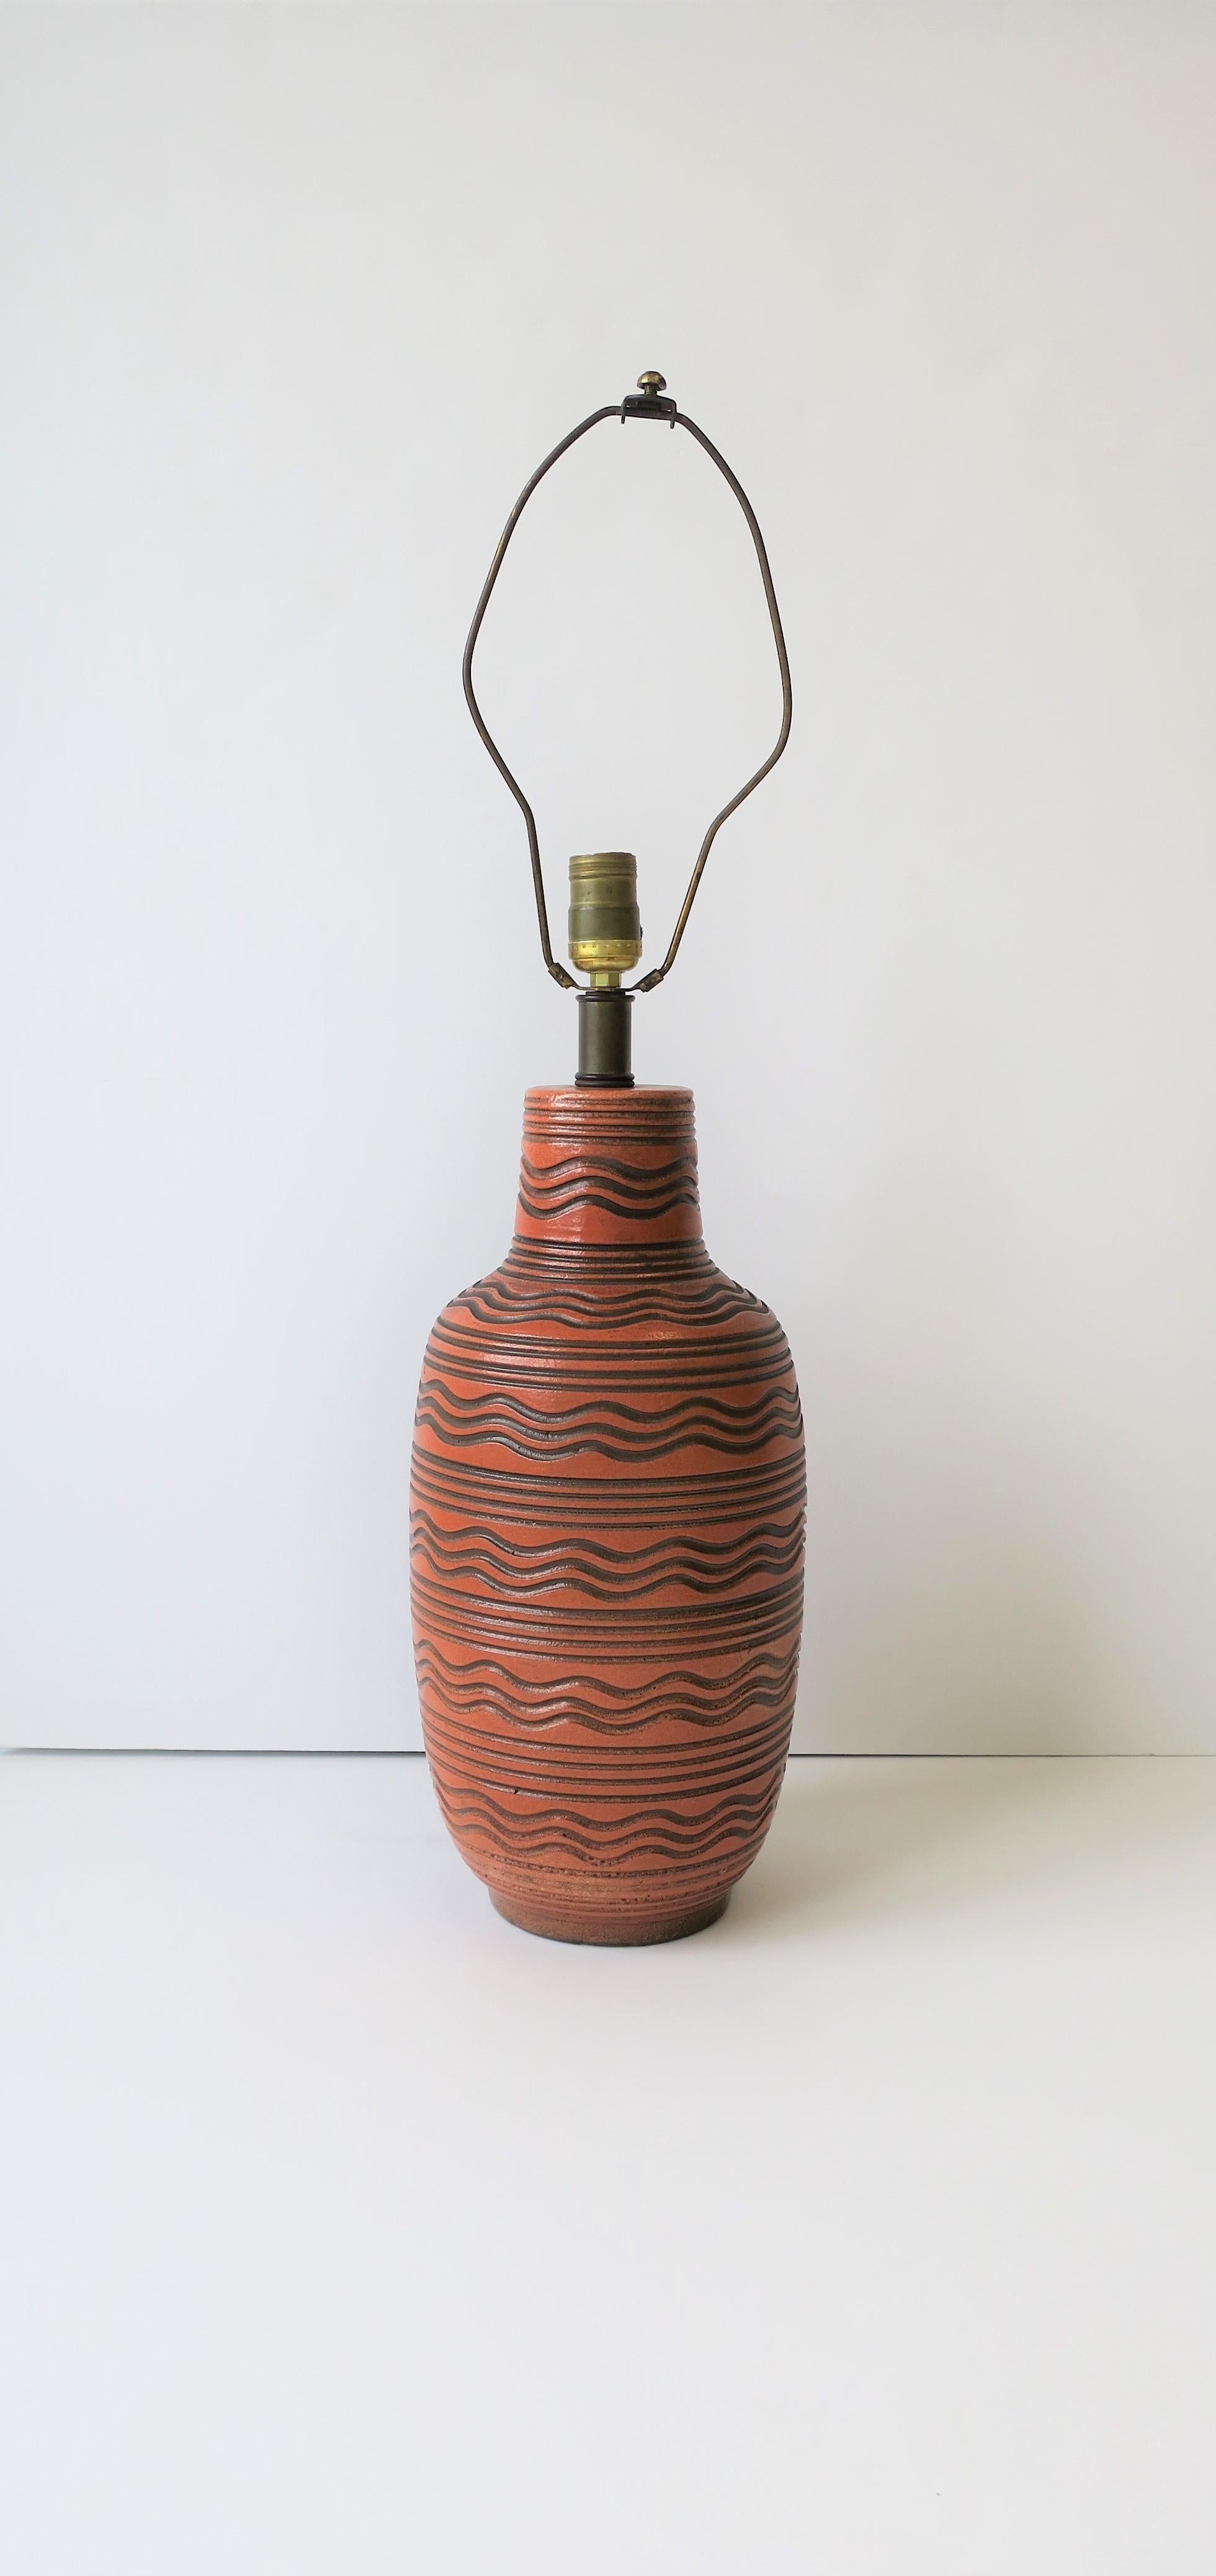 American Terracotta and Black Pottery Table Lamp by Design Technics